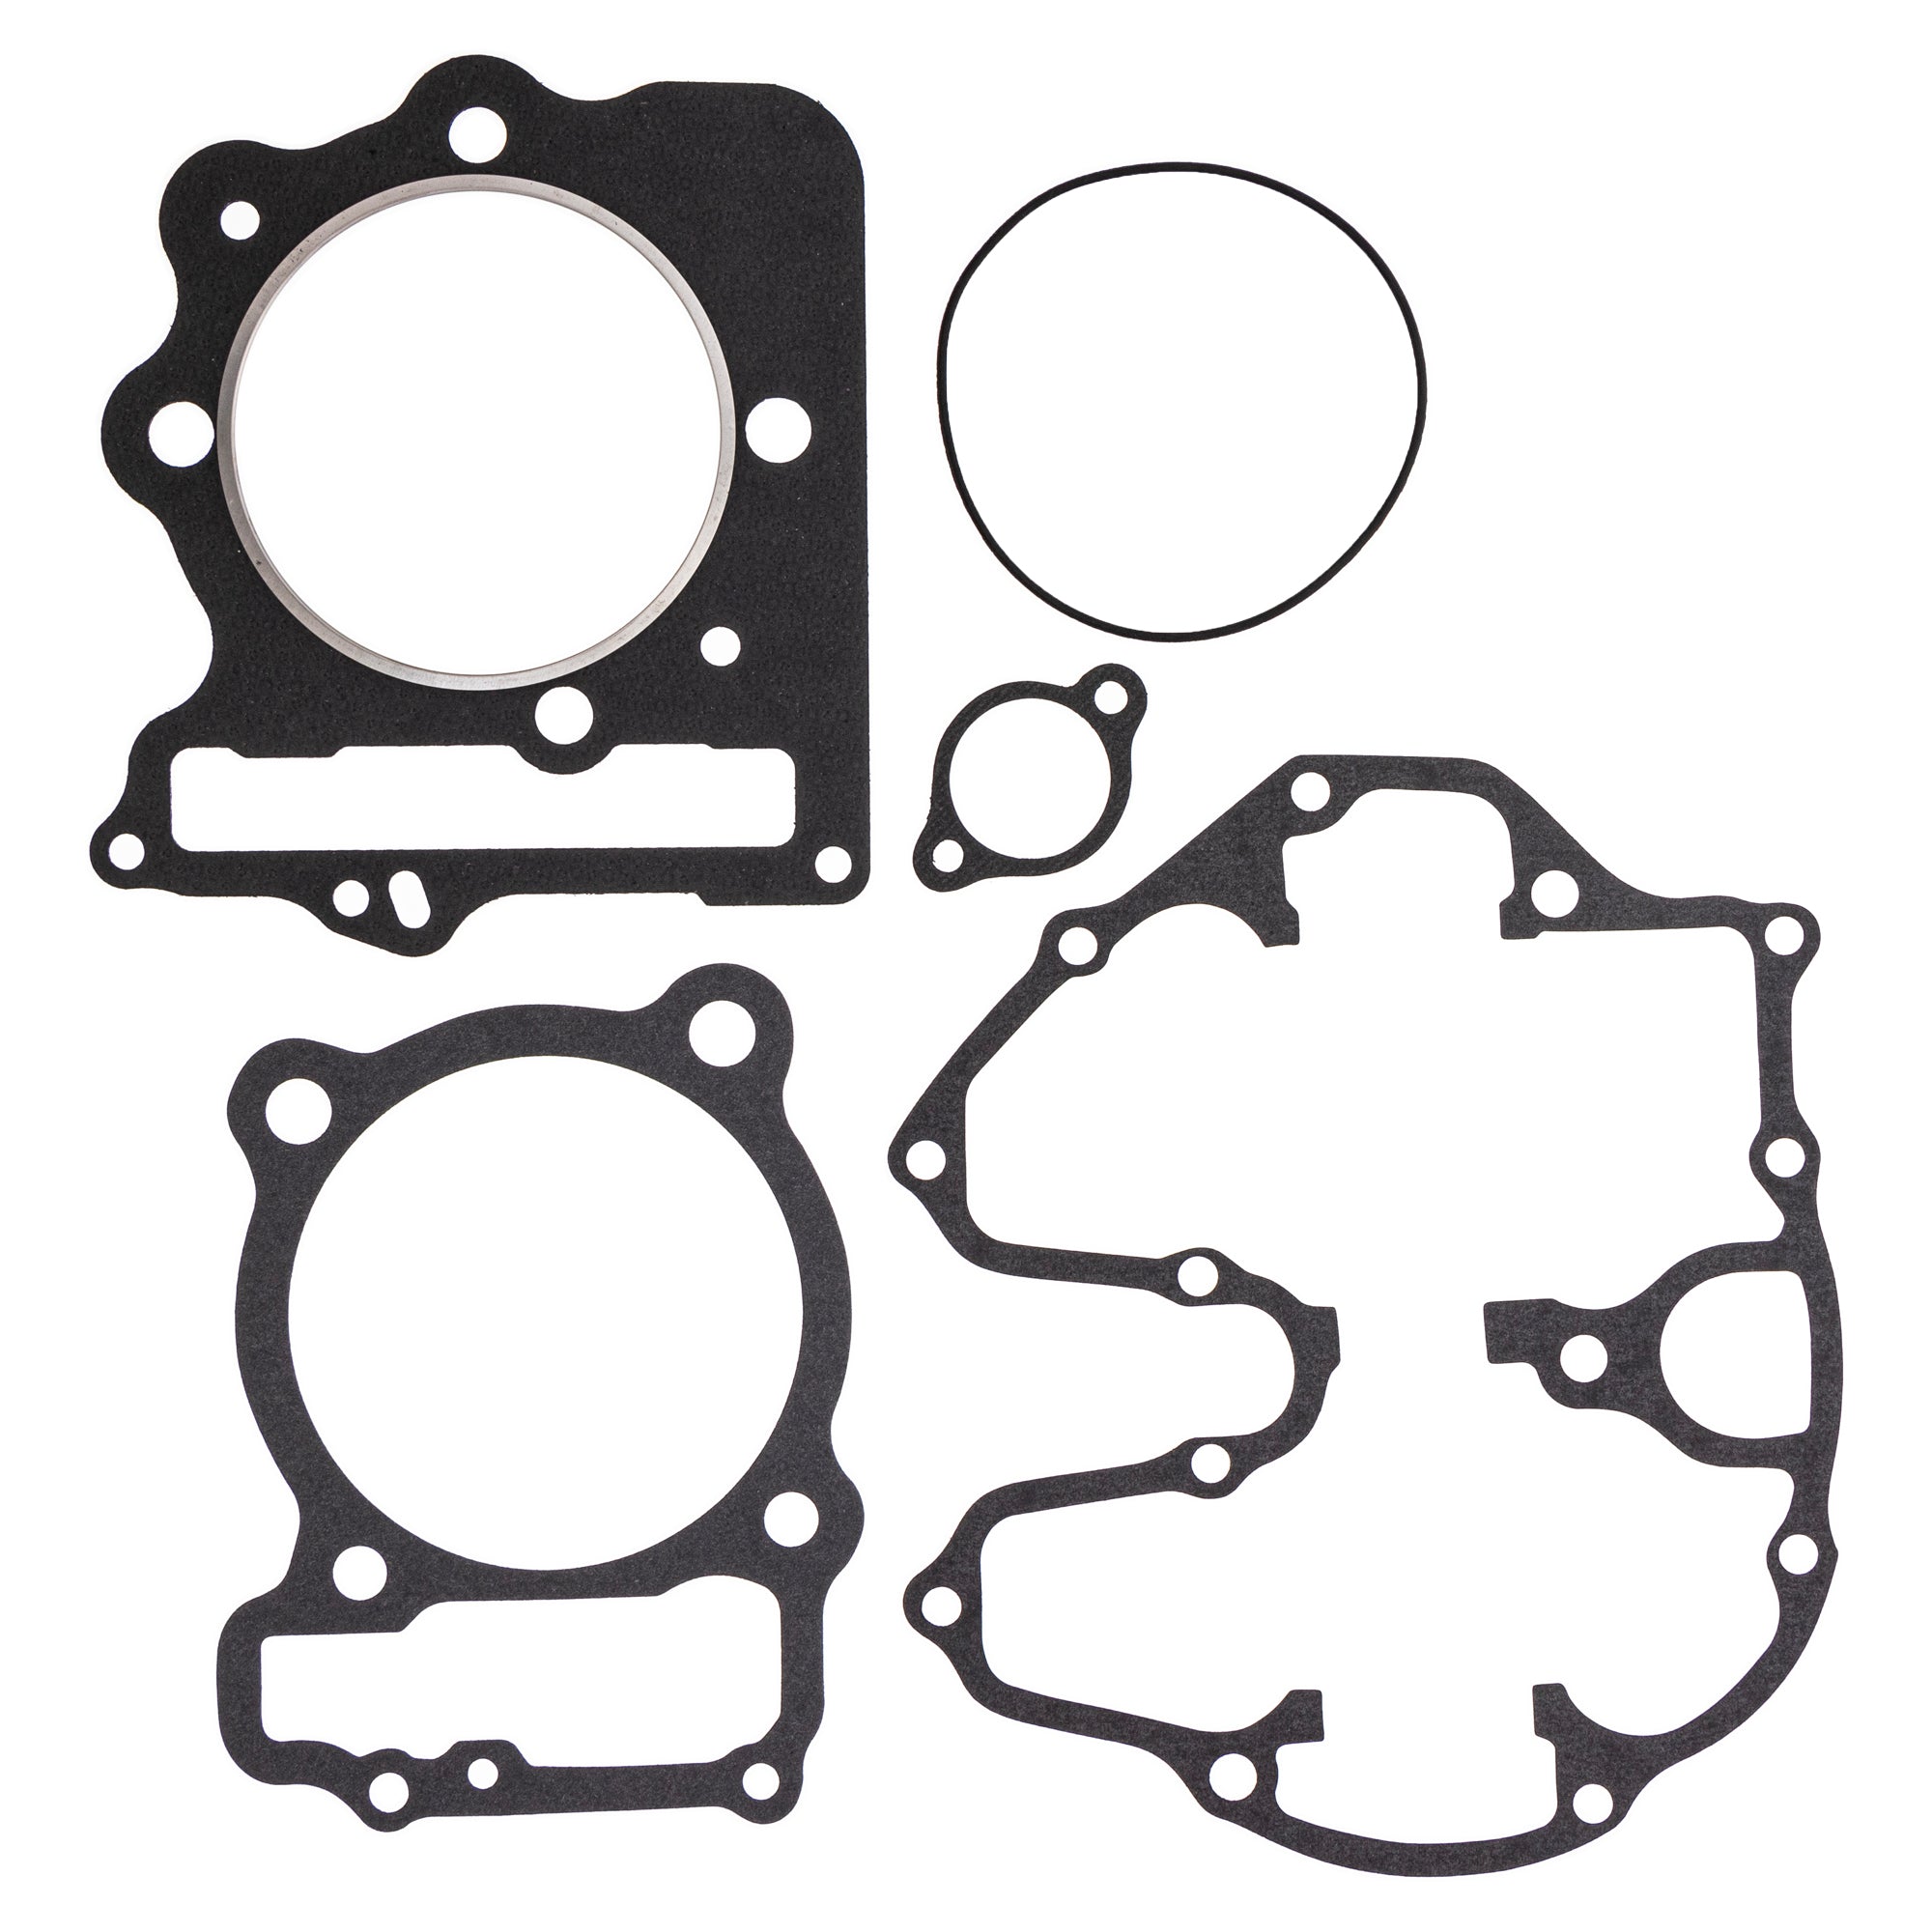 397cc Cylinder Piston Top End Kit for Honda XR400R 12191-KCY-672